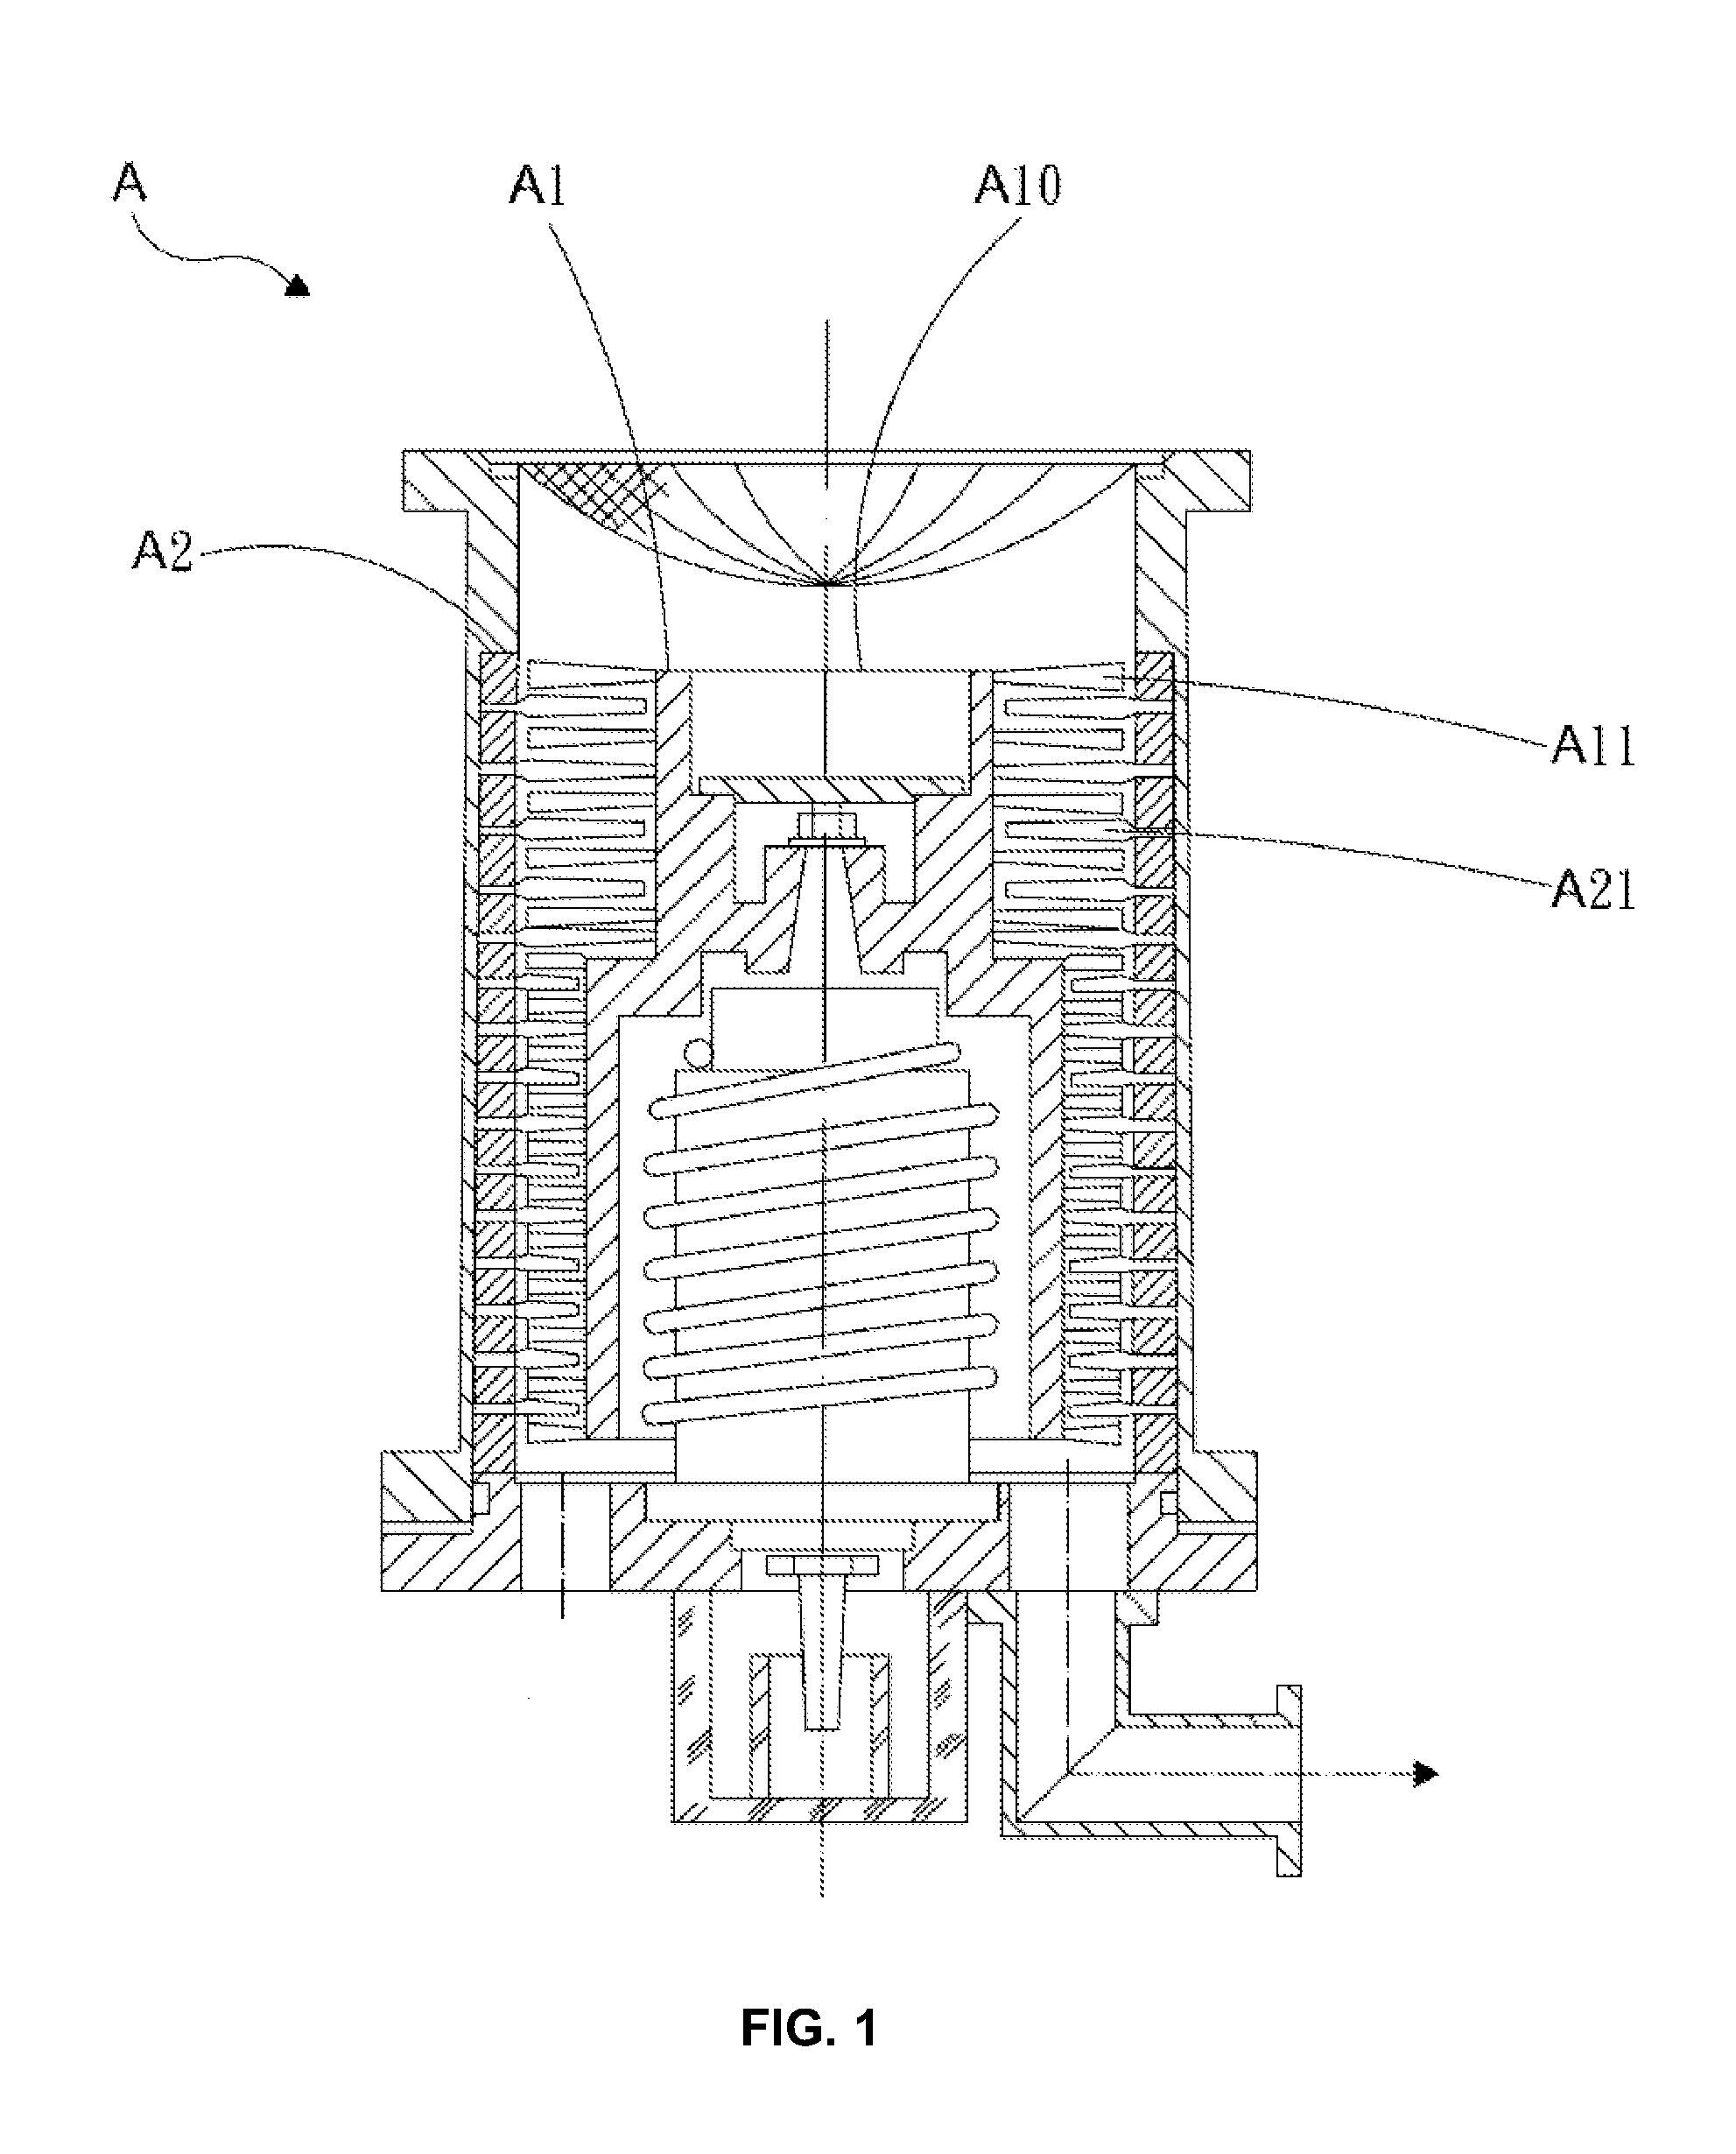 Turbo Molecular Pump with Improved Blade Structures